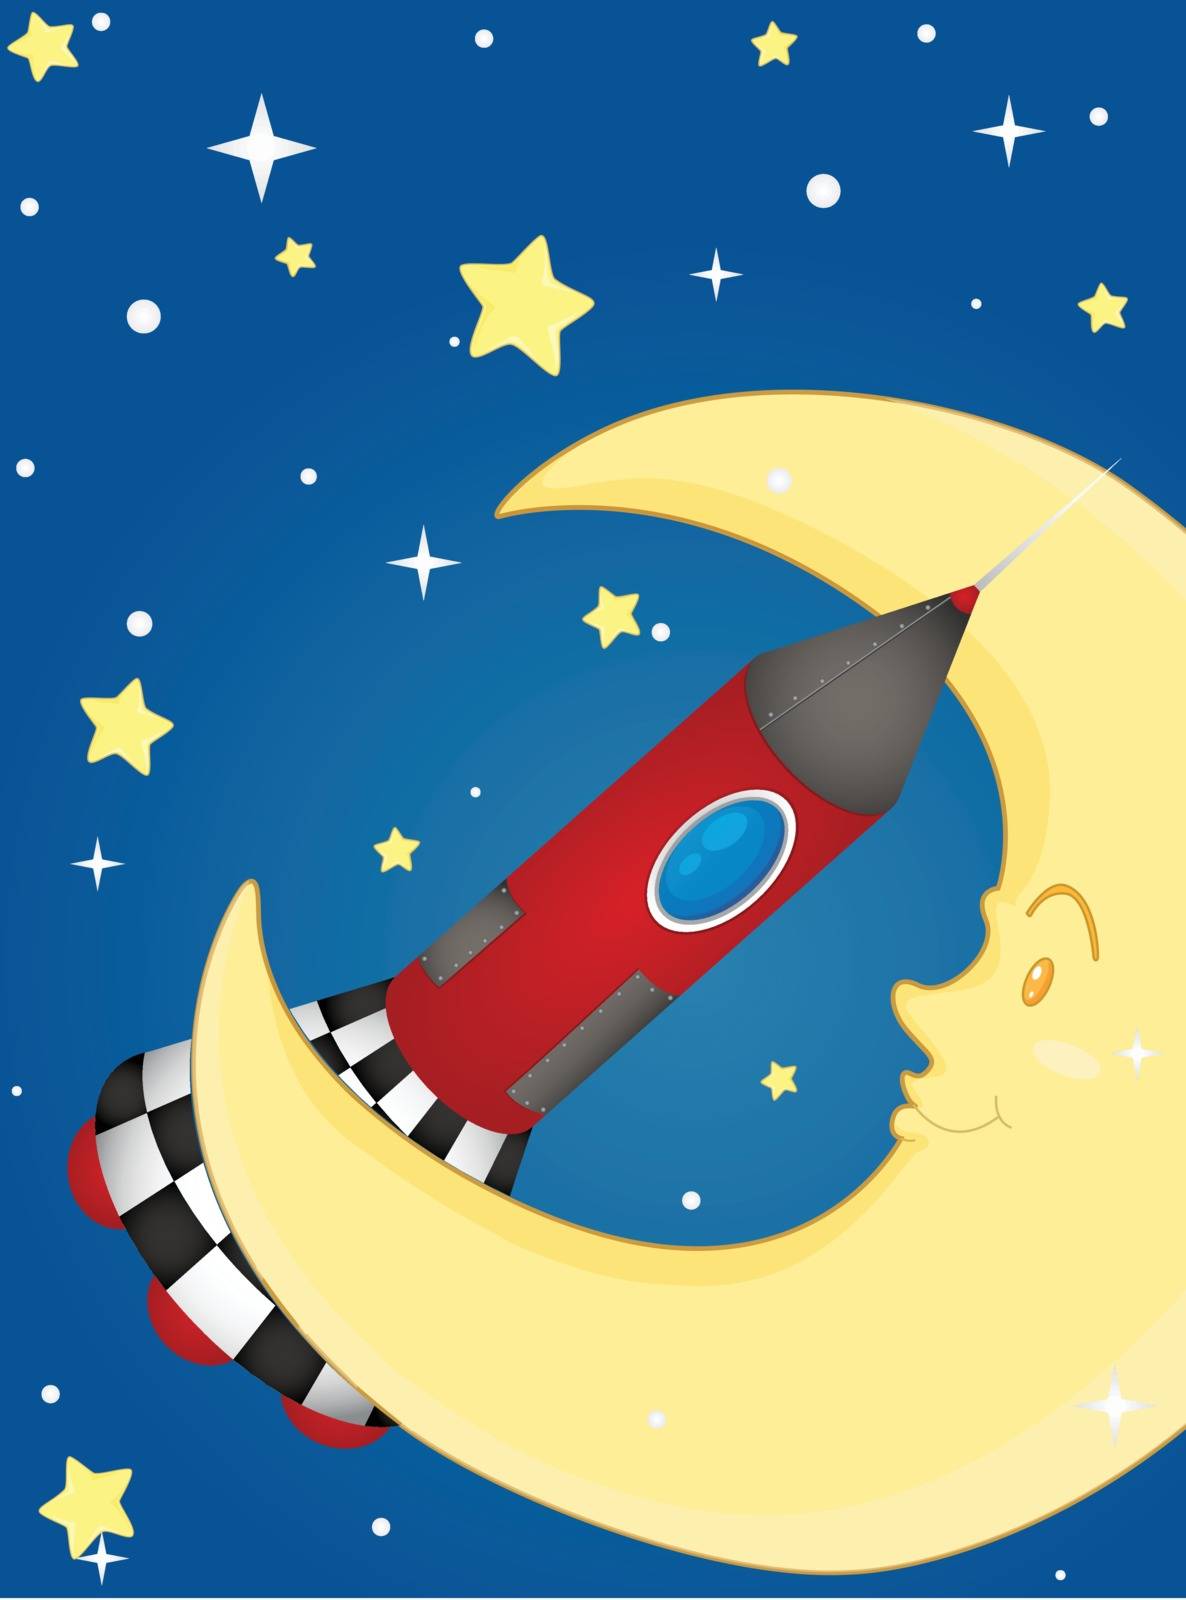 Illustration of rocket and moon